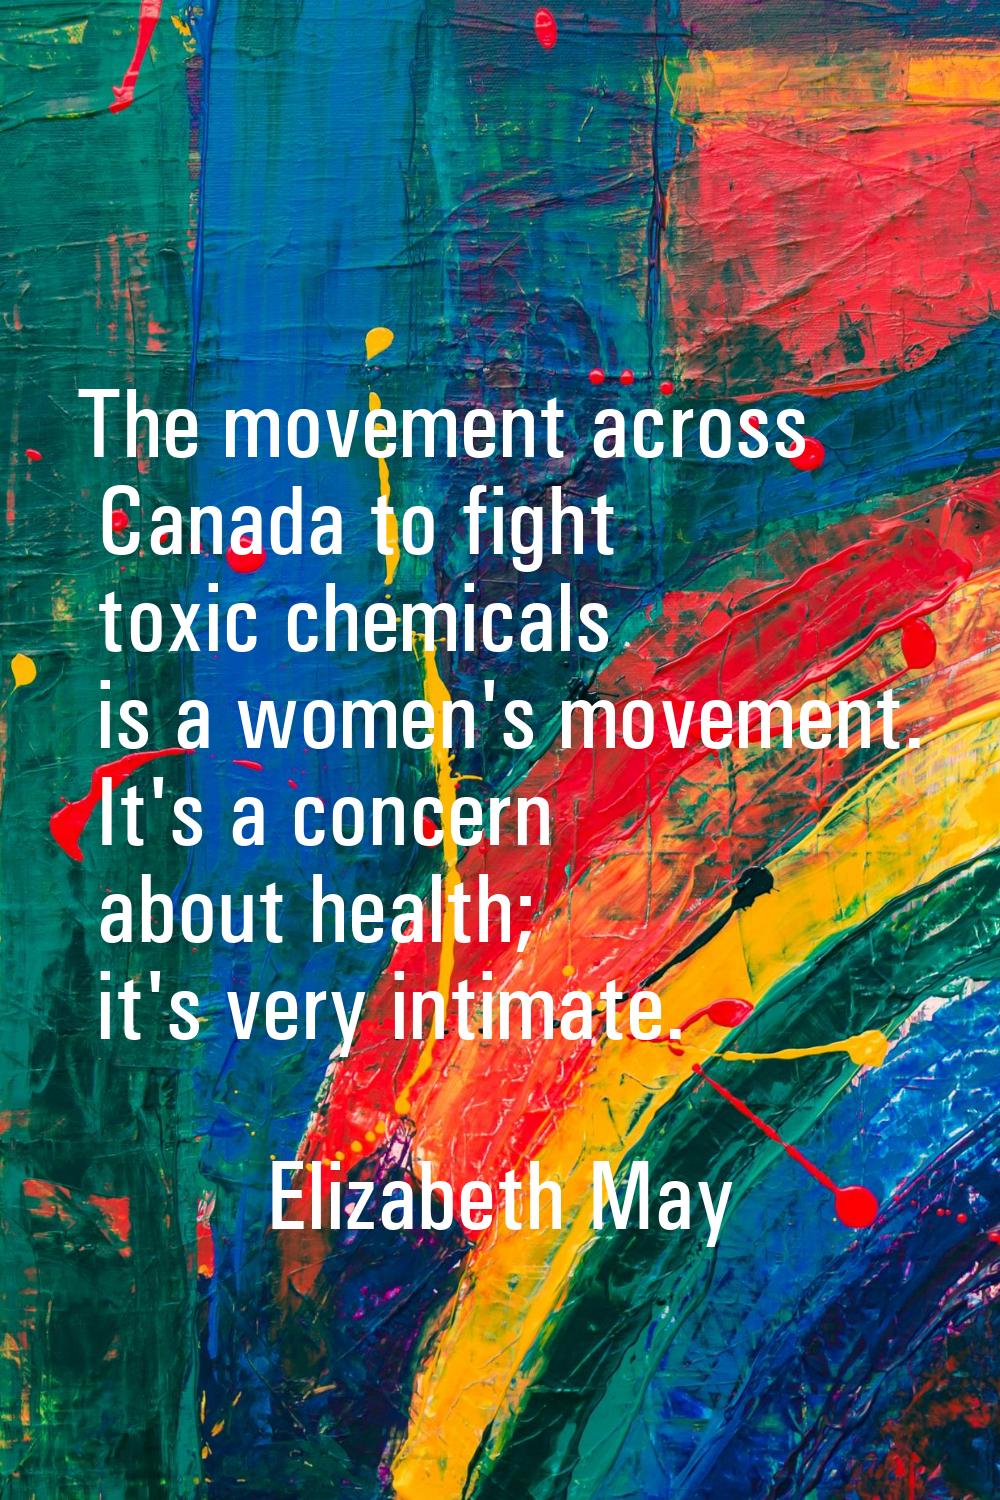 The movement across Canada to fight toxic chemicals is a women's movement. It's a concern about hea